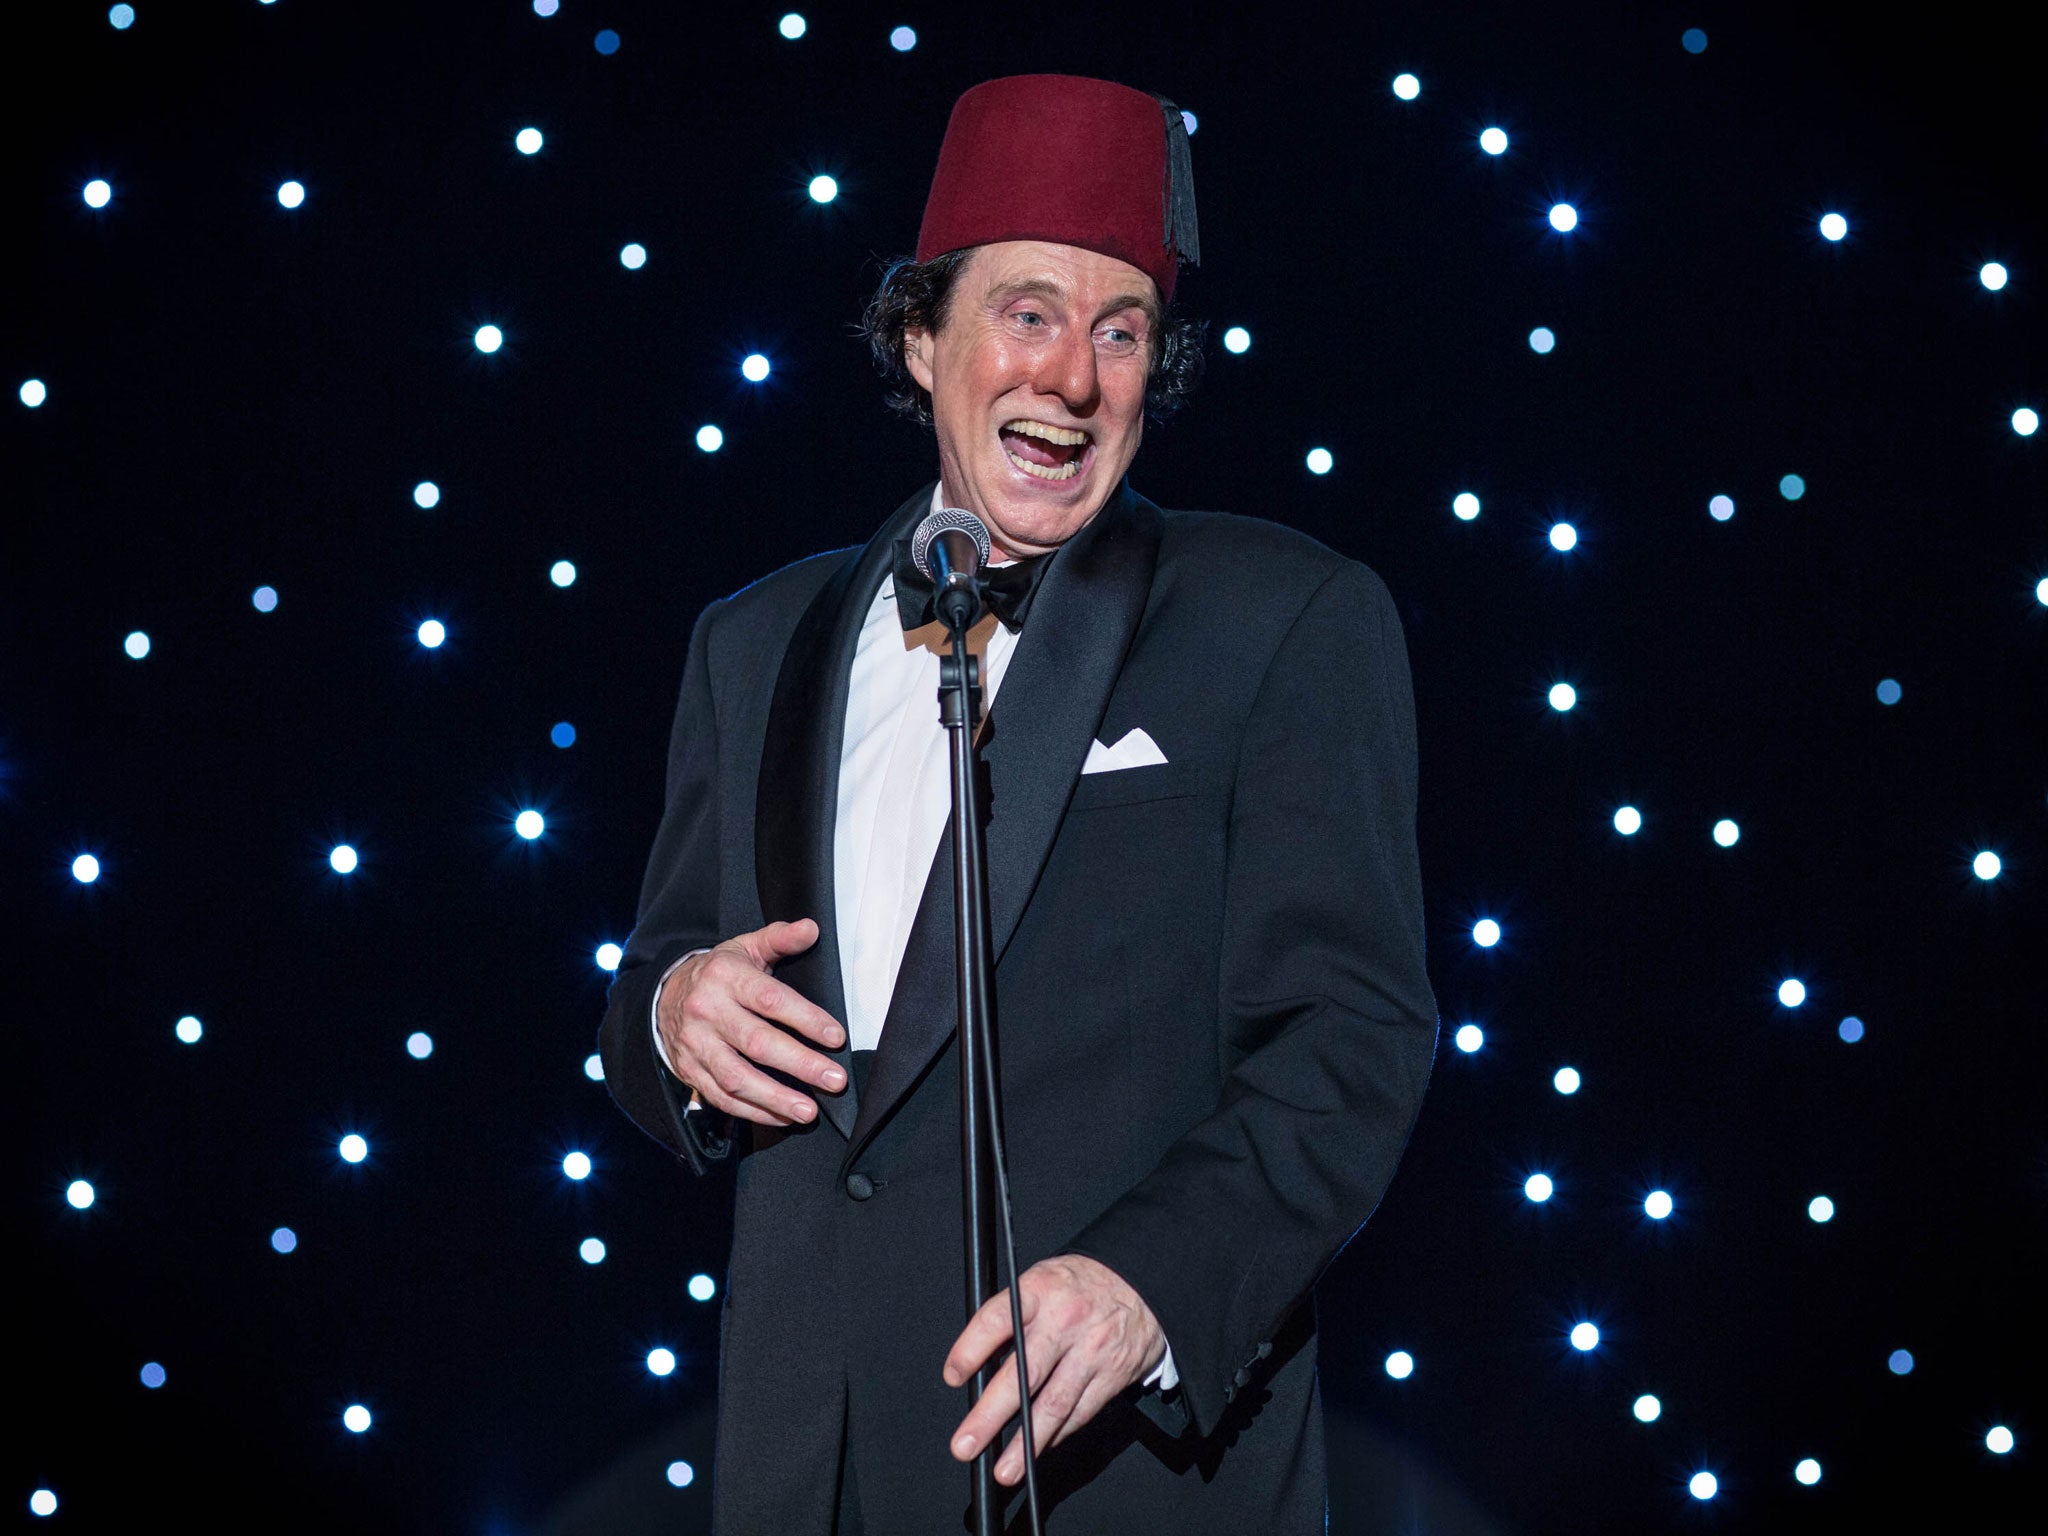 Funny fez: David Threlfall as Tommy Cooper